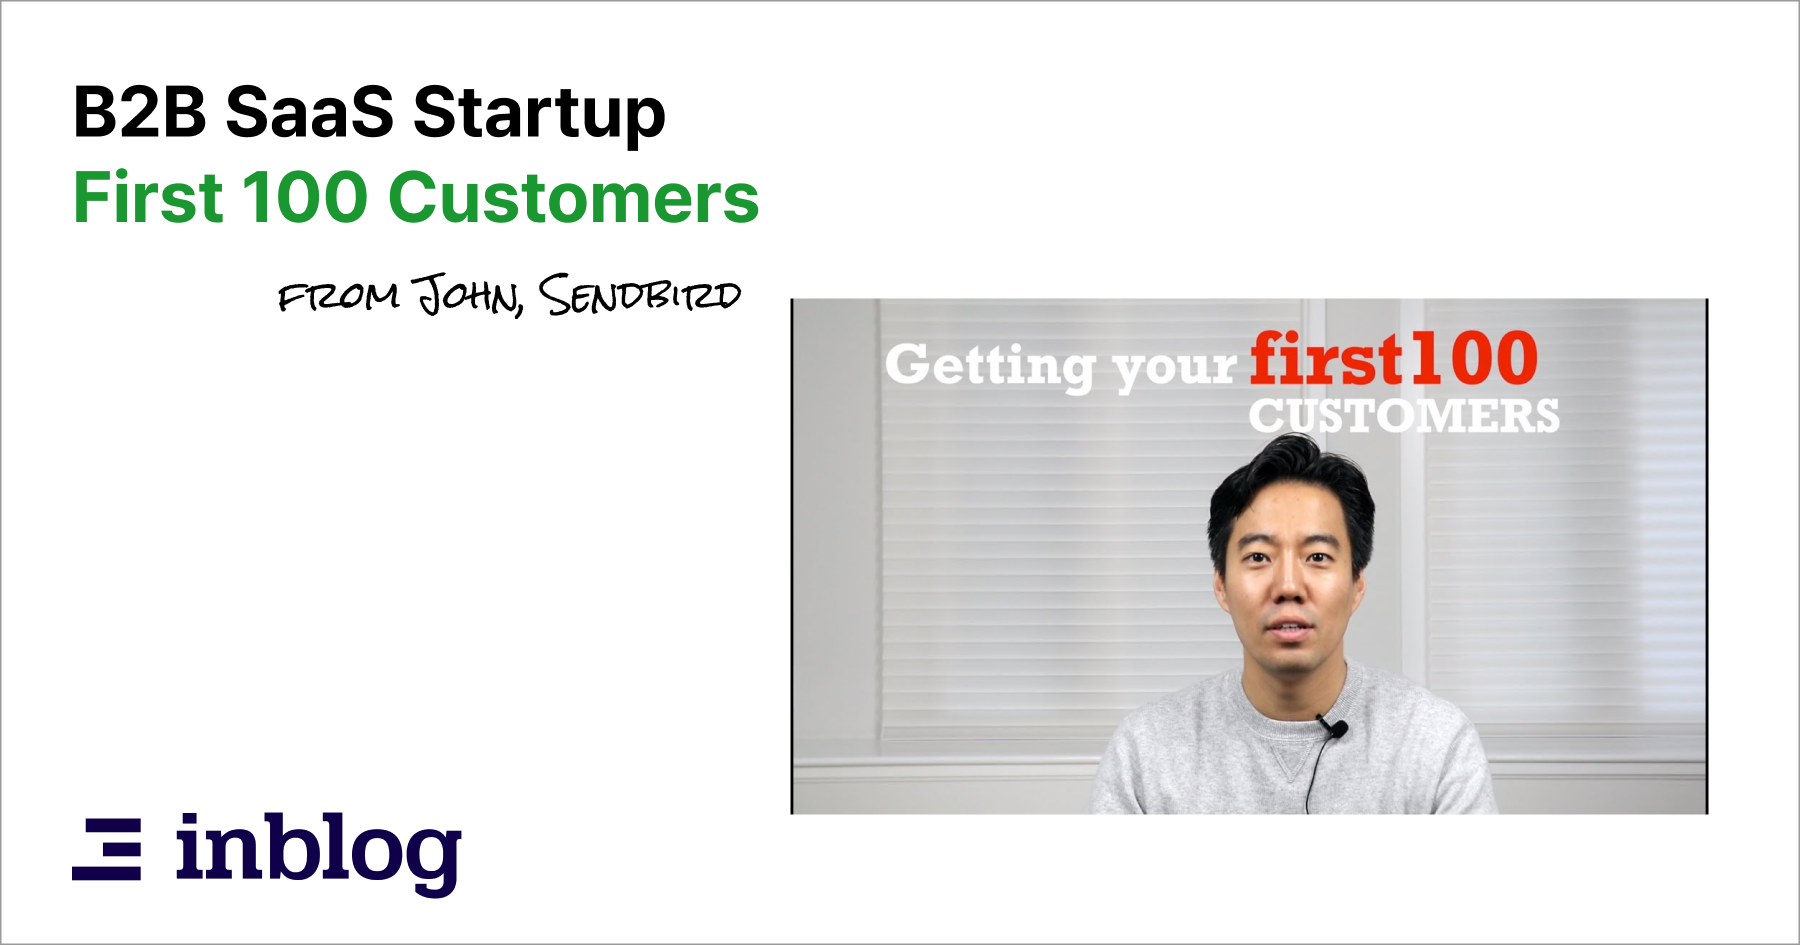 Building your first 100 customers for your B2B SaaS startup